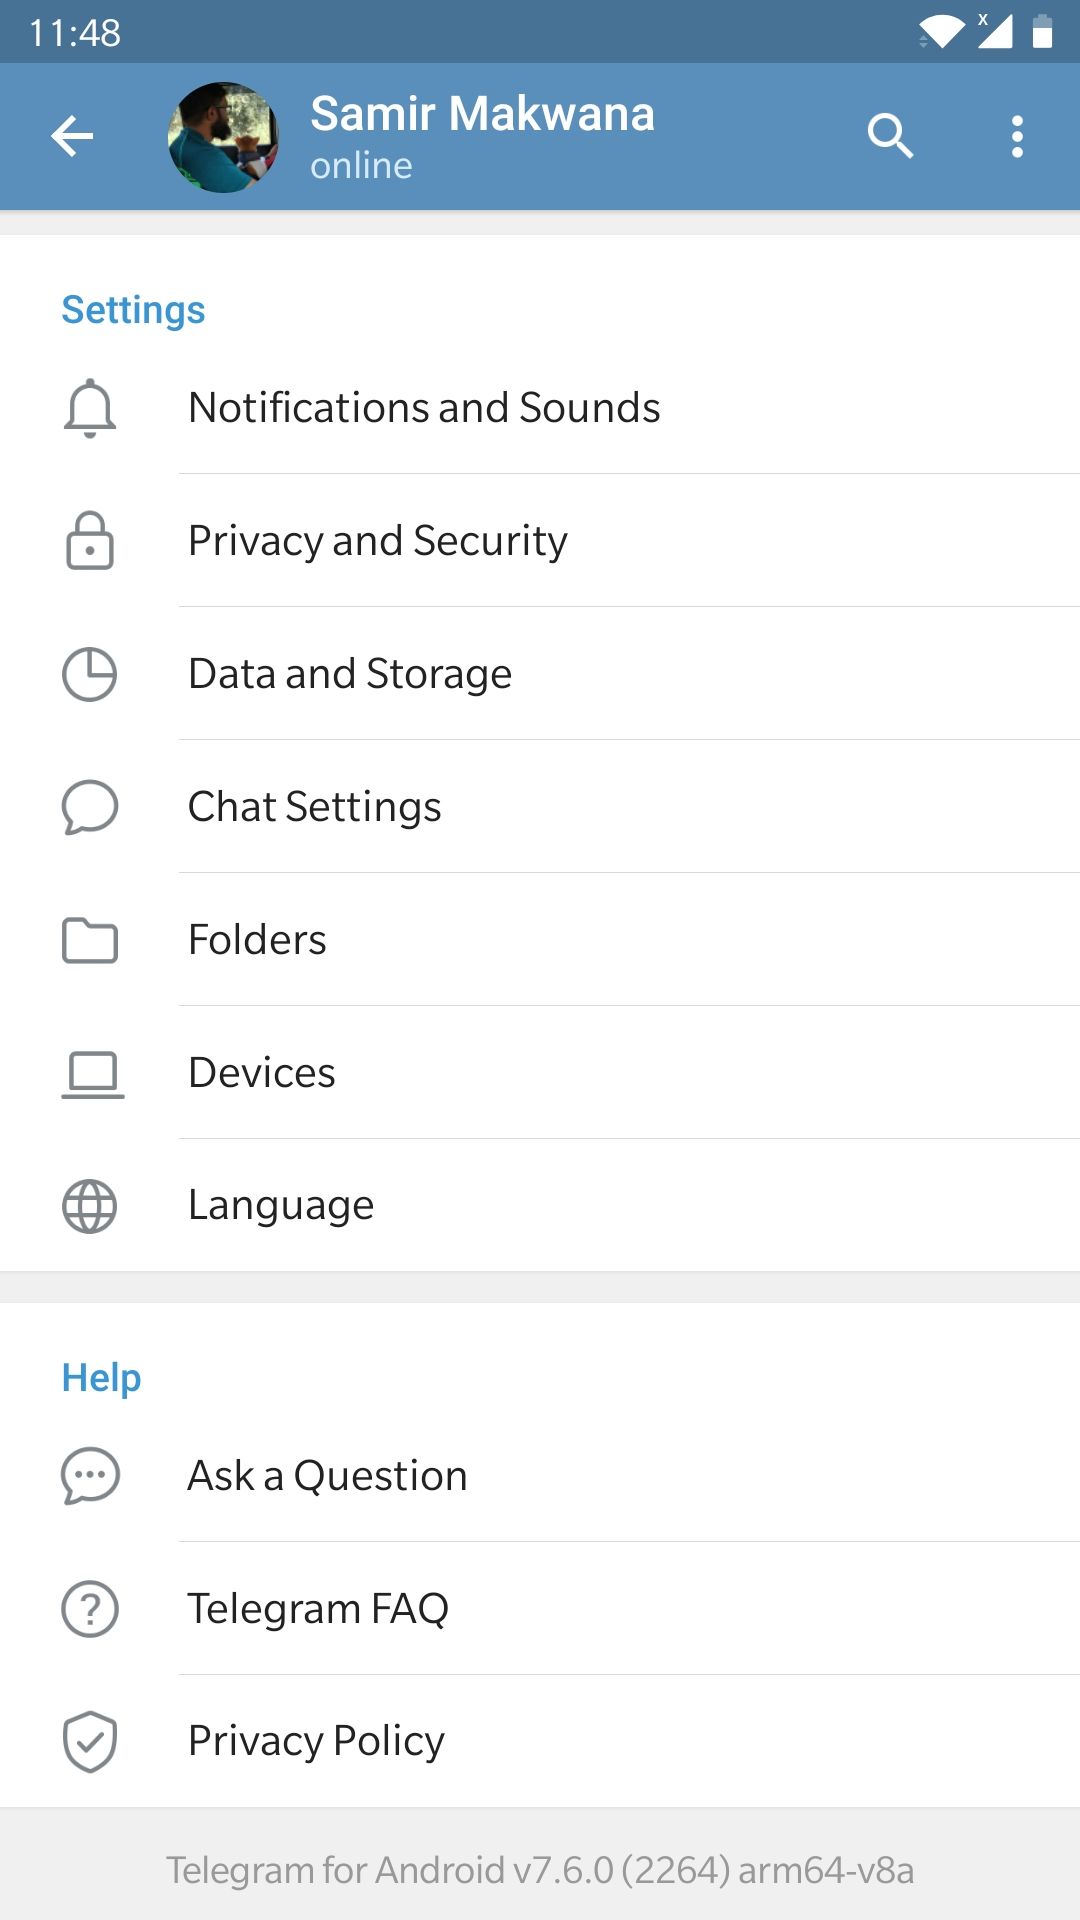 Privacy and Security Under Settings in Telegram for Android